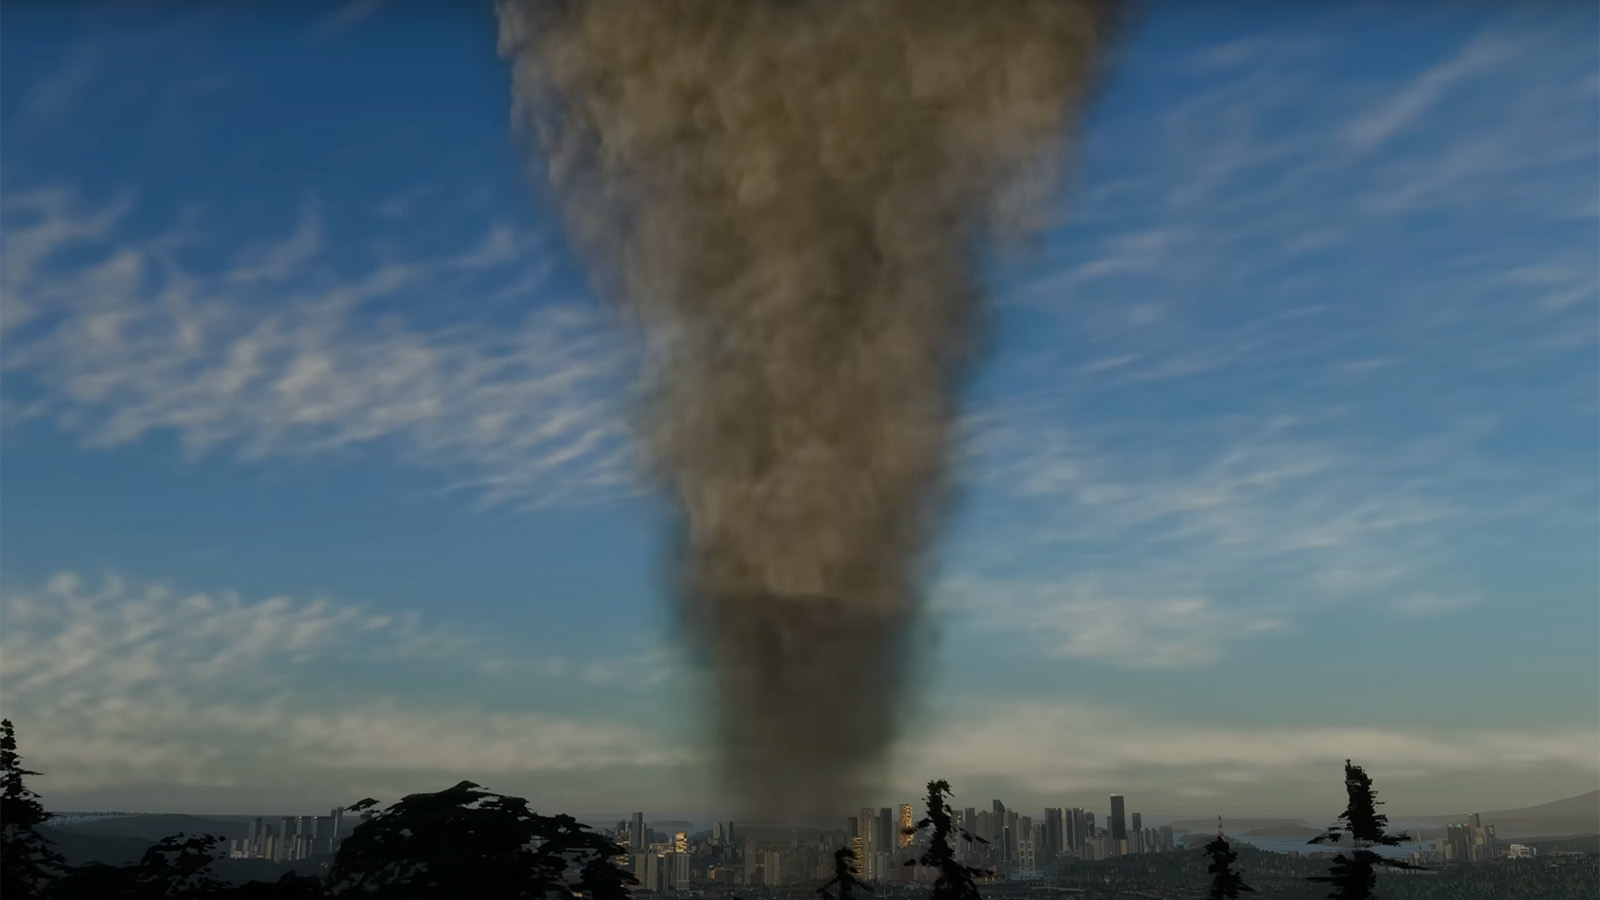 Cities: Skylines 2’s Seasons, Climates, And Natural Disasters Highlighted In New Video